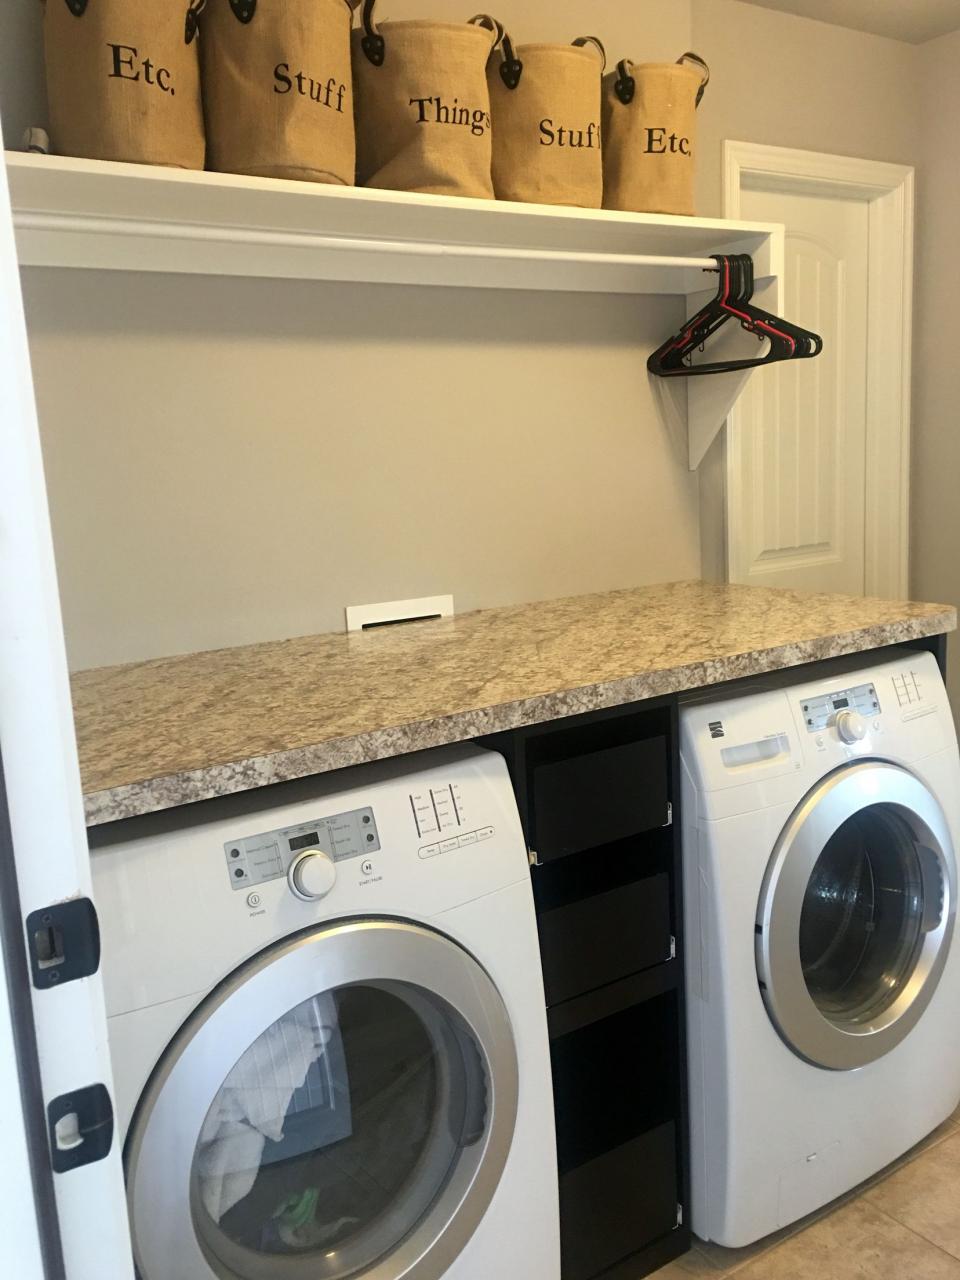 Laundry room with counter over the washer dryer, slide out drawers in